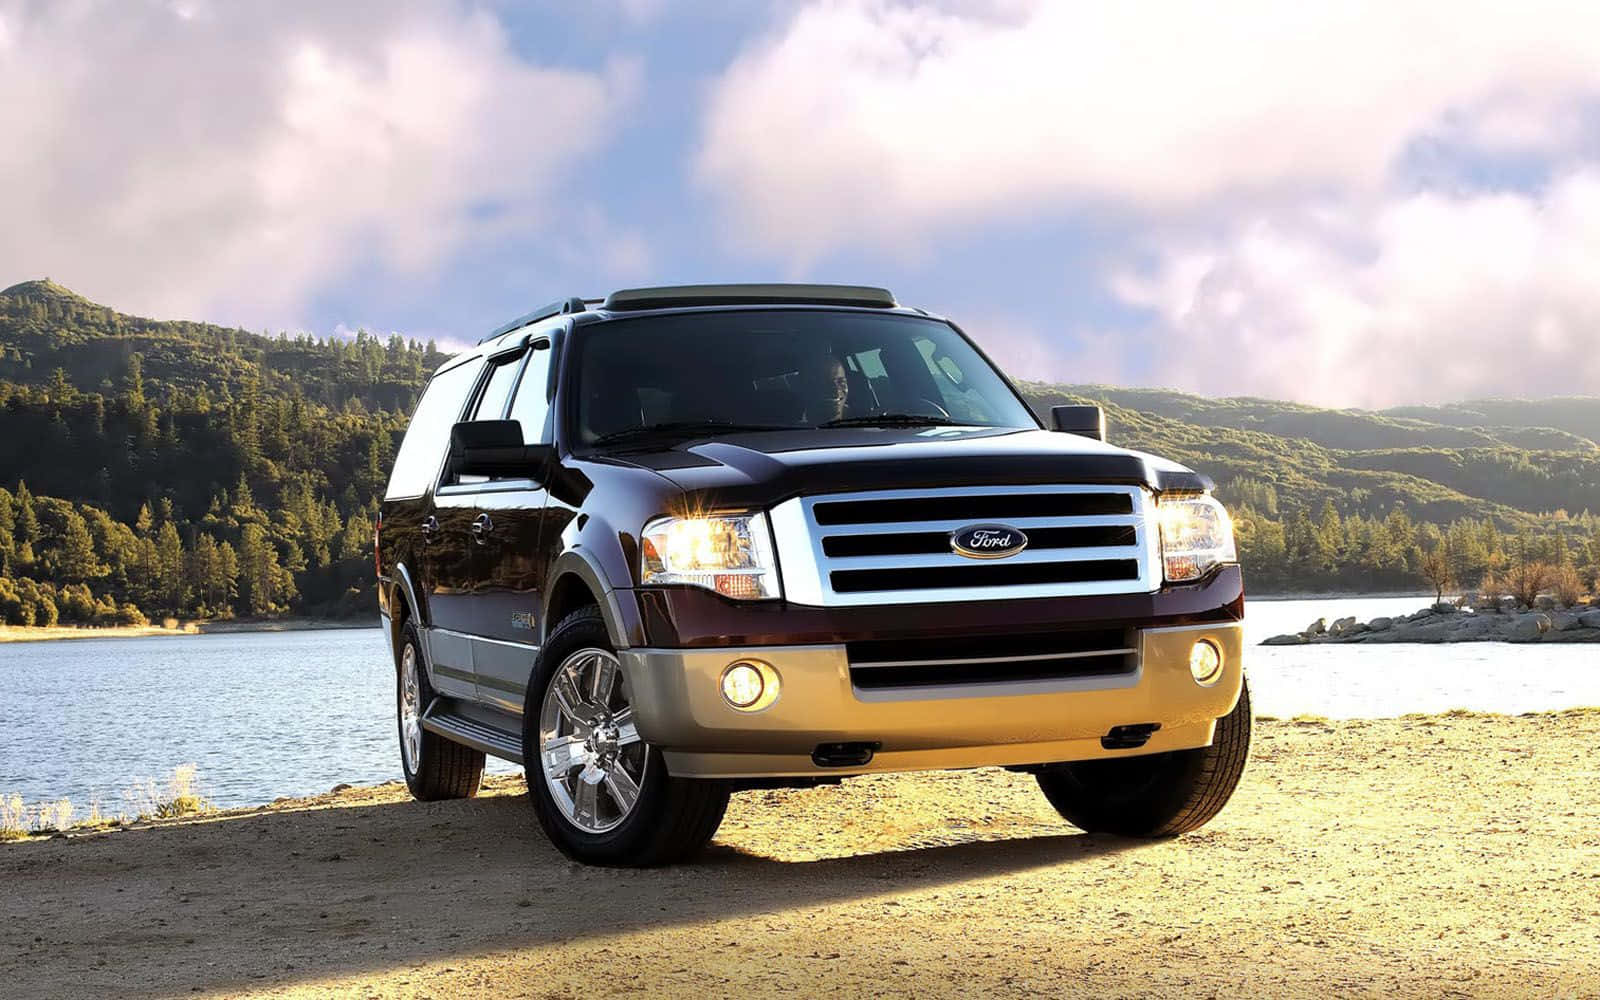 Powerful Ford Expedition cruising on the road Wallpaper